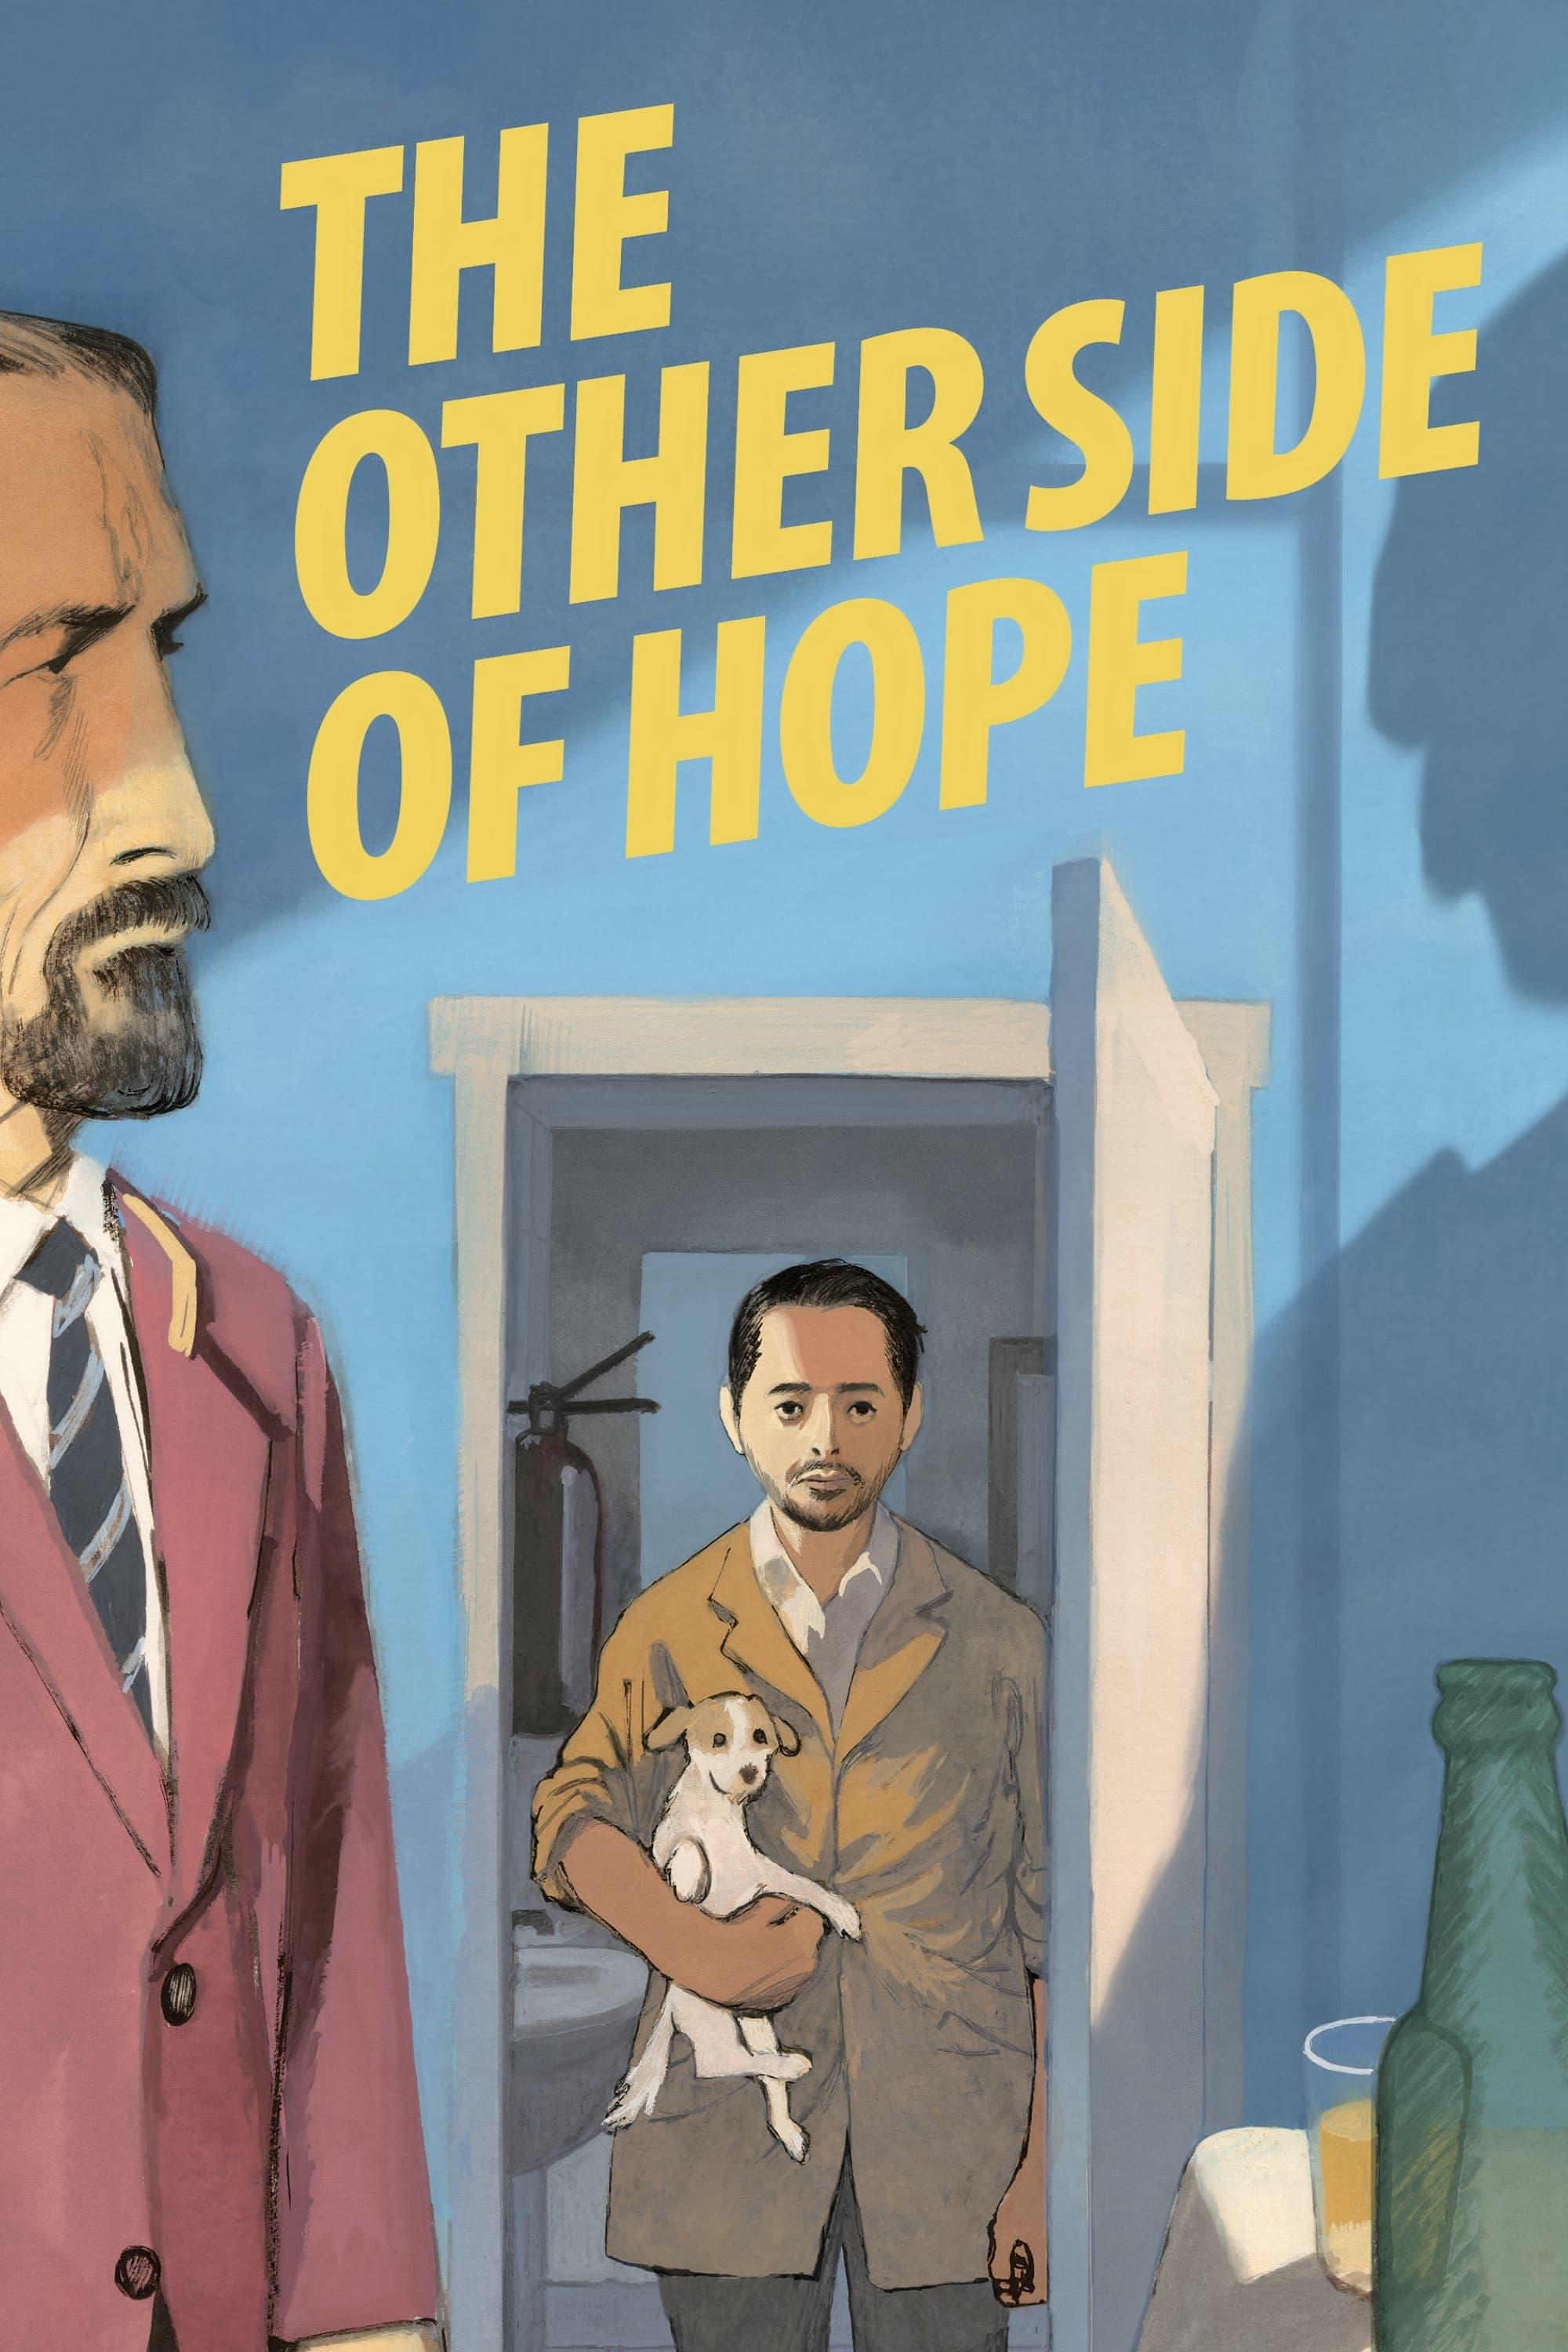 The Other Side of Hope poster